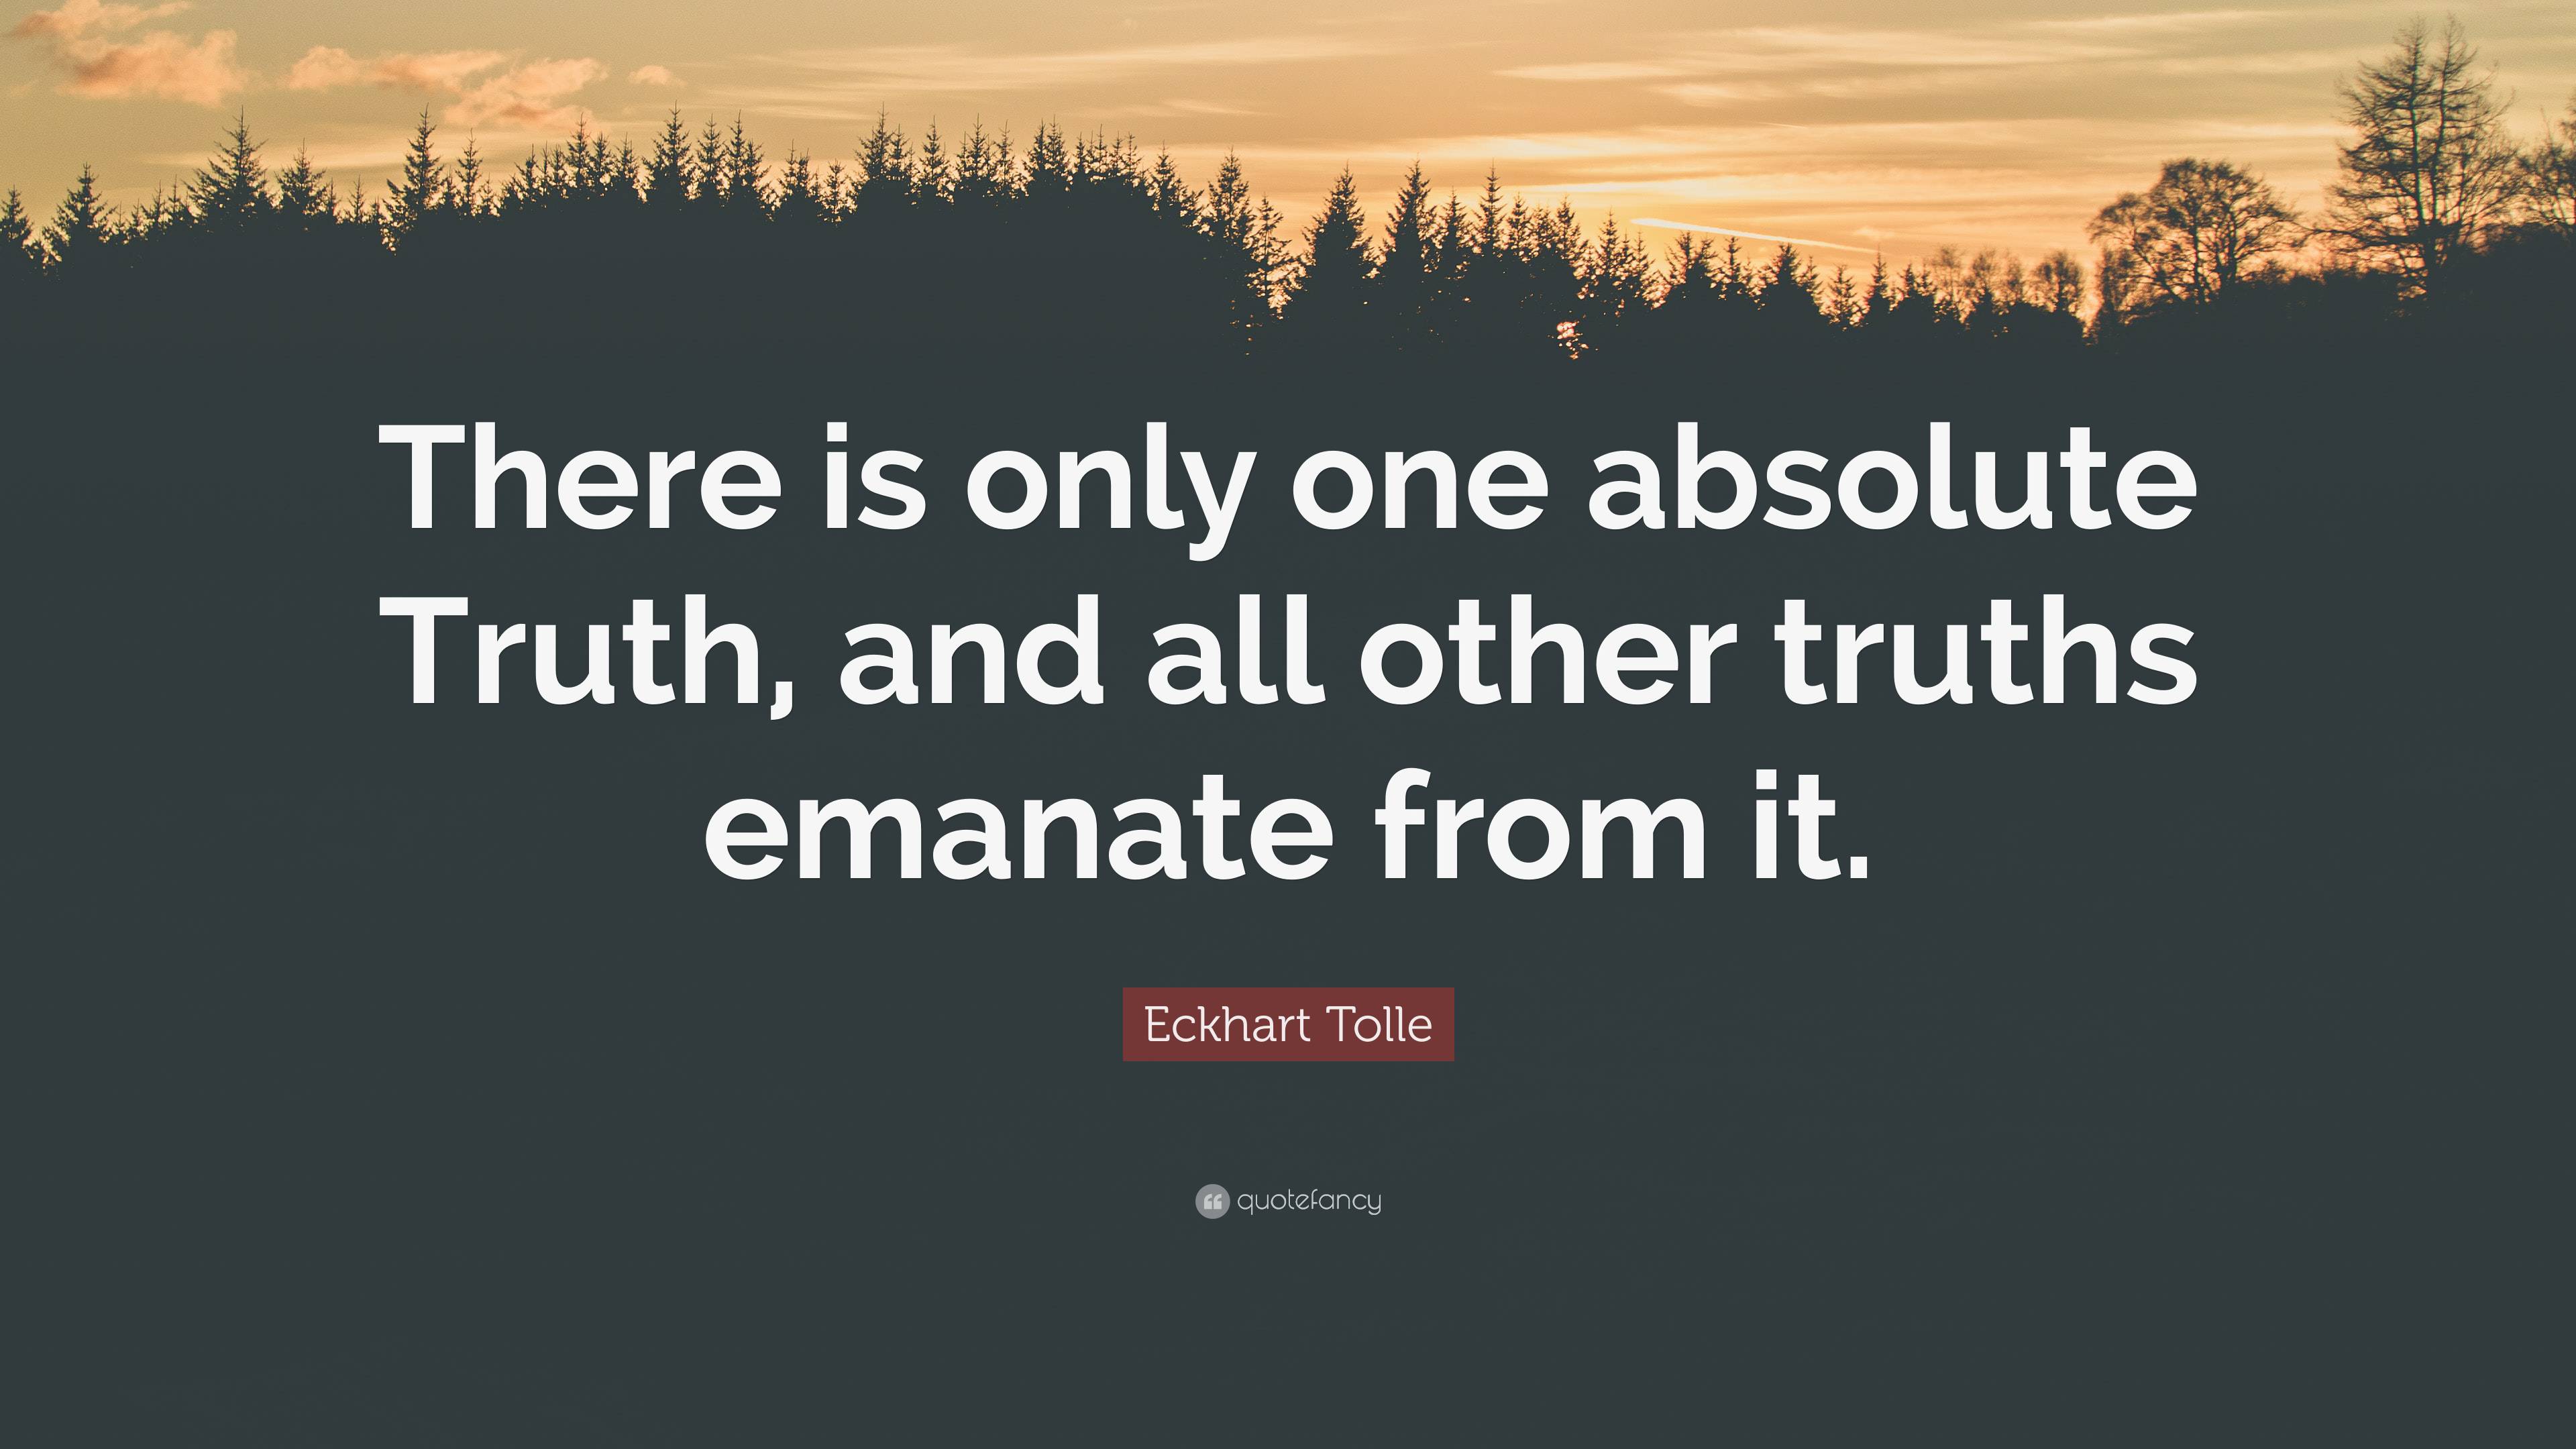 Eckhart Tolle Quote: “There is only one absolute Truth, and all other ...